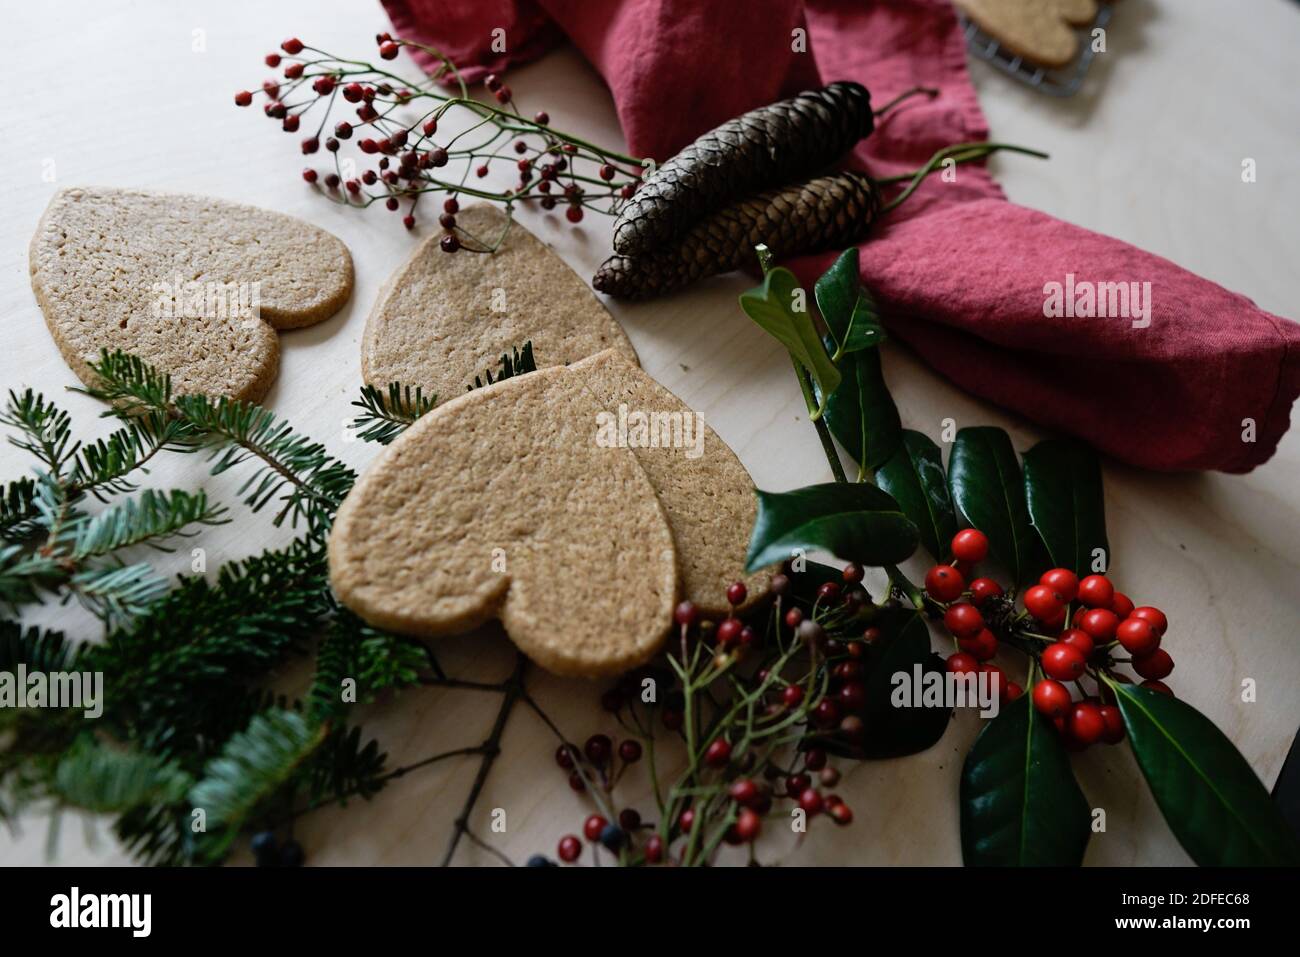 Arrangement of holiday objects and decorations -- green spruce, red berries, ginger heart cookies. Stock Photo